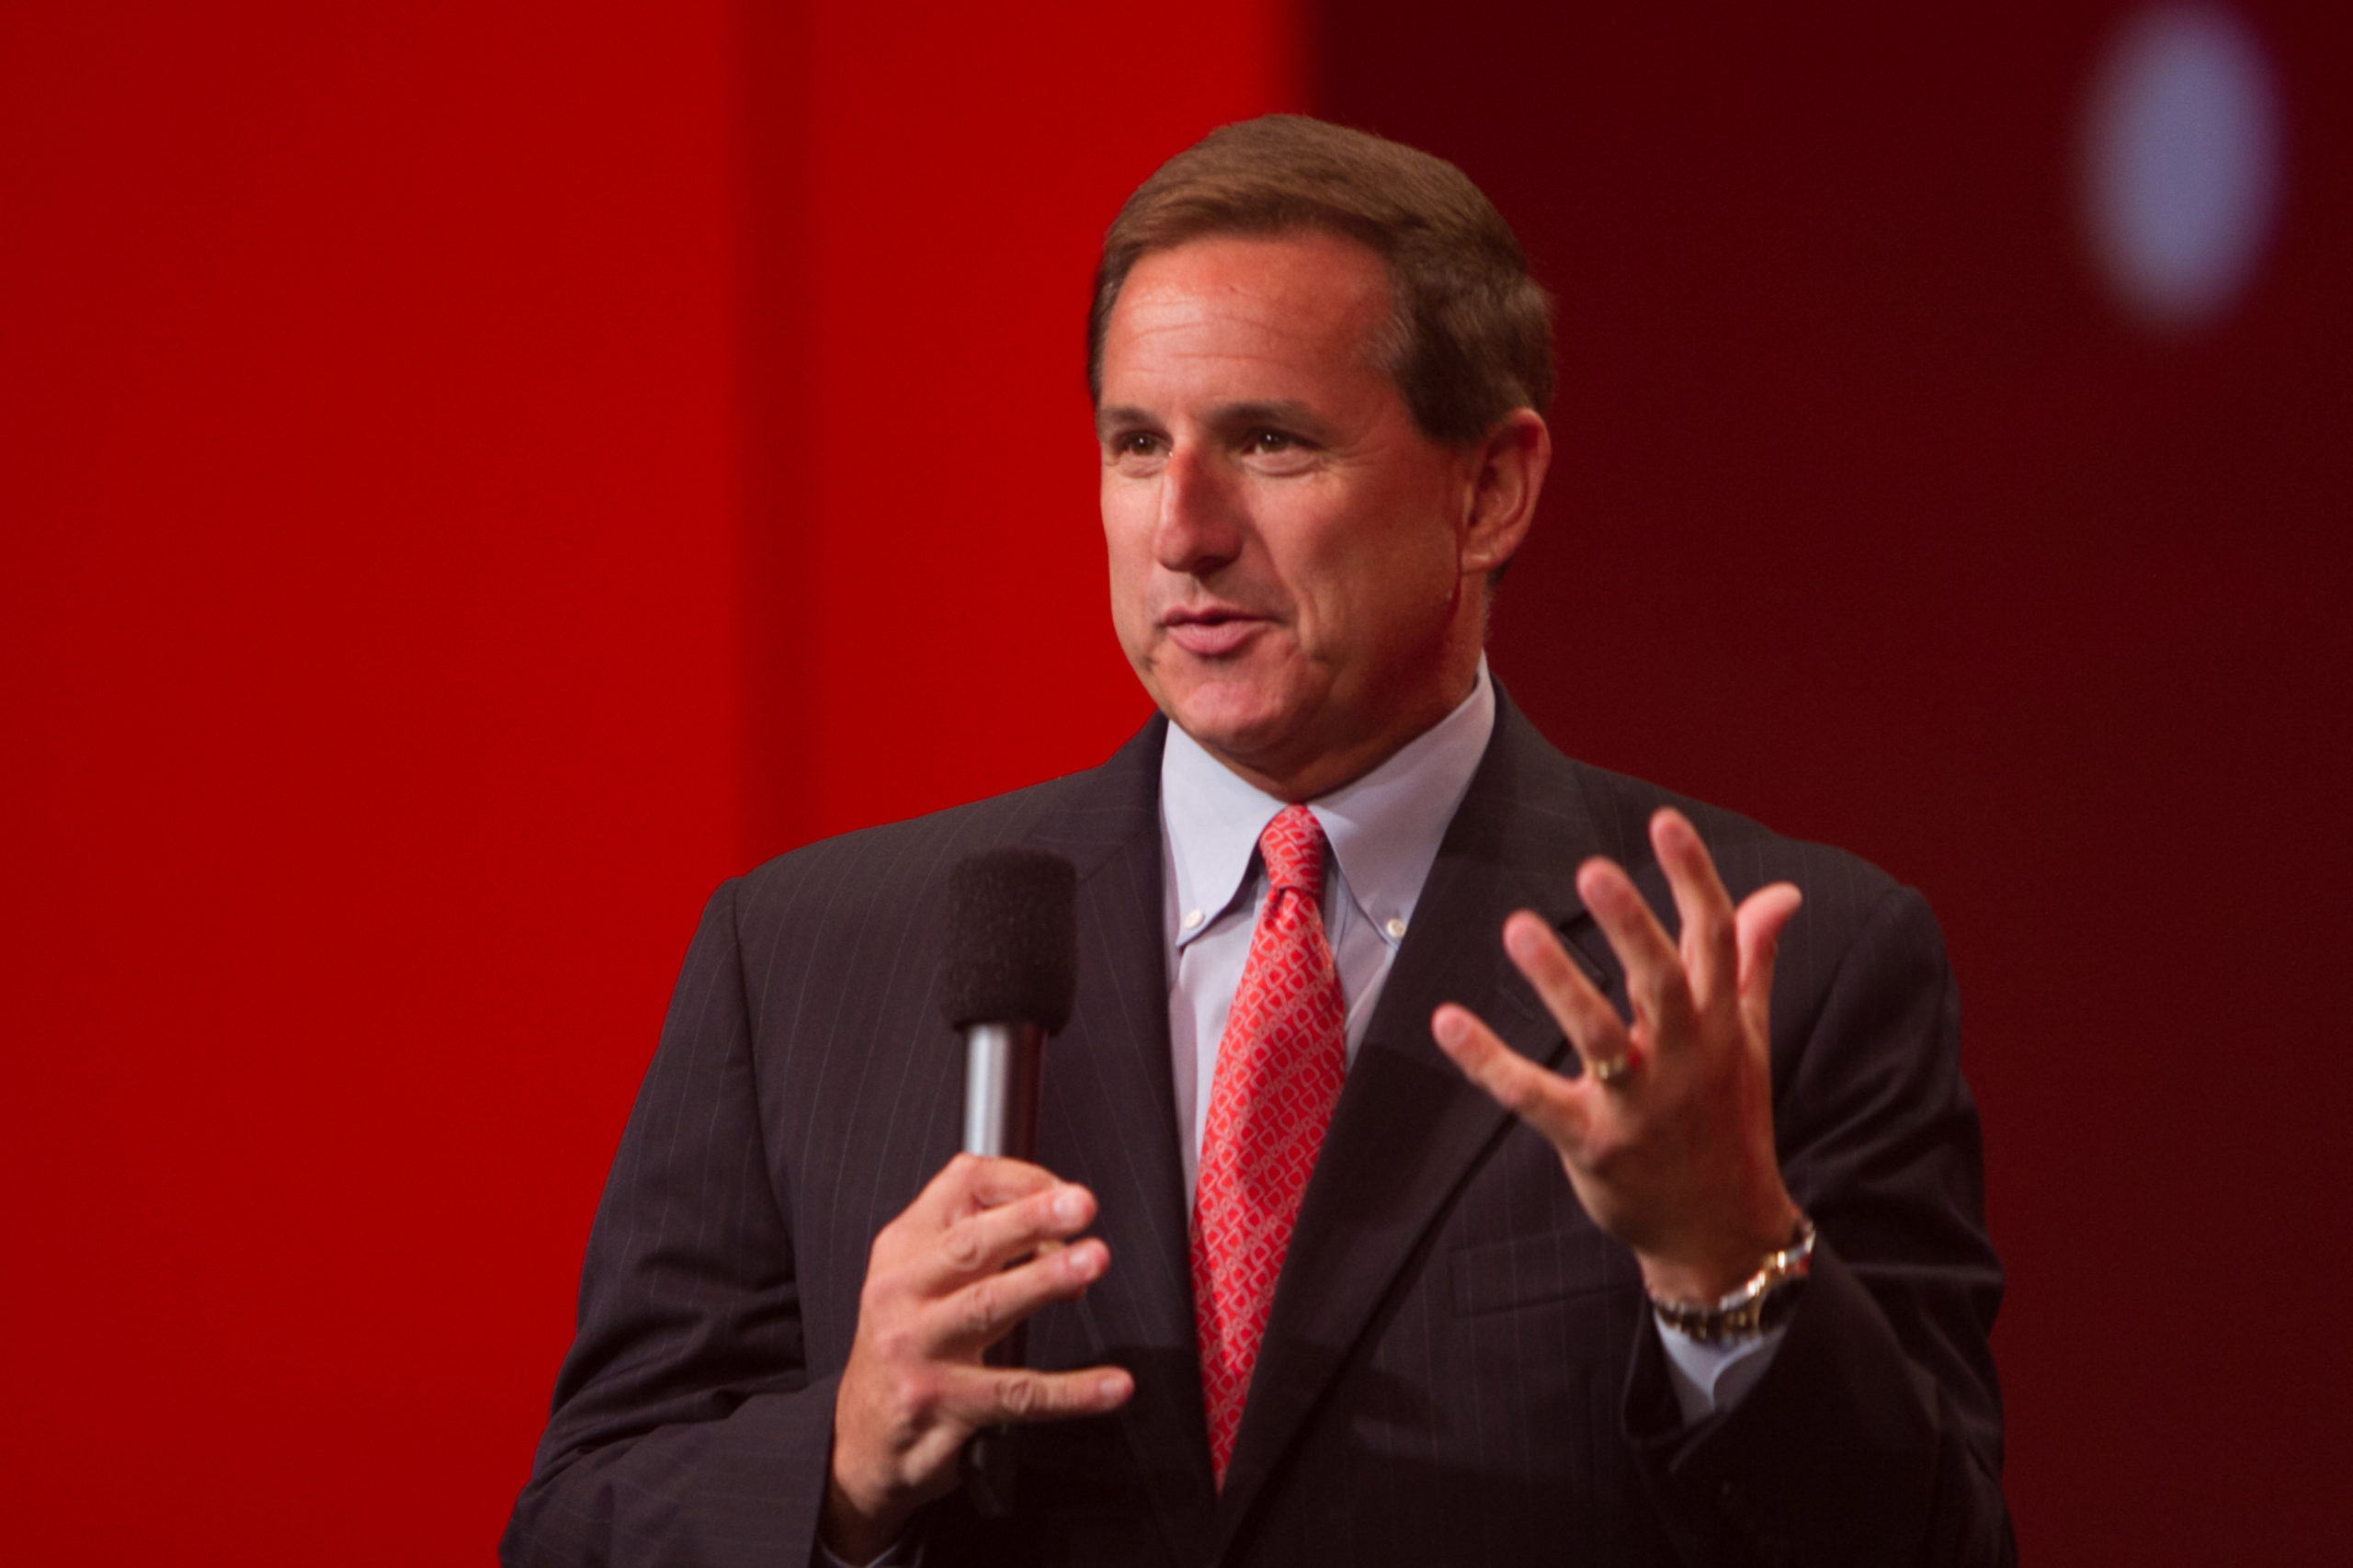 Oracle CEO Mark Hurd Bloomberg TV comments